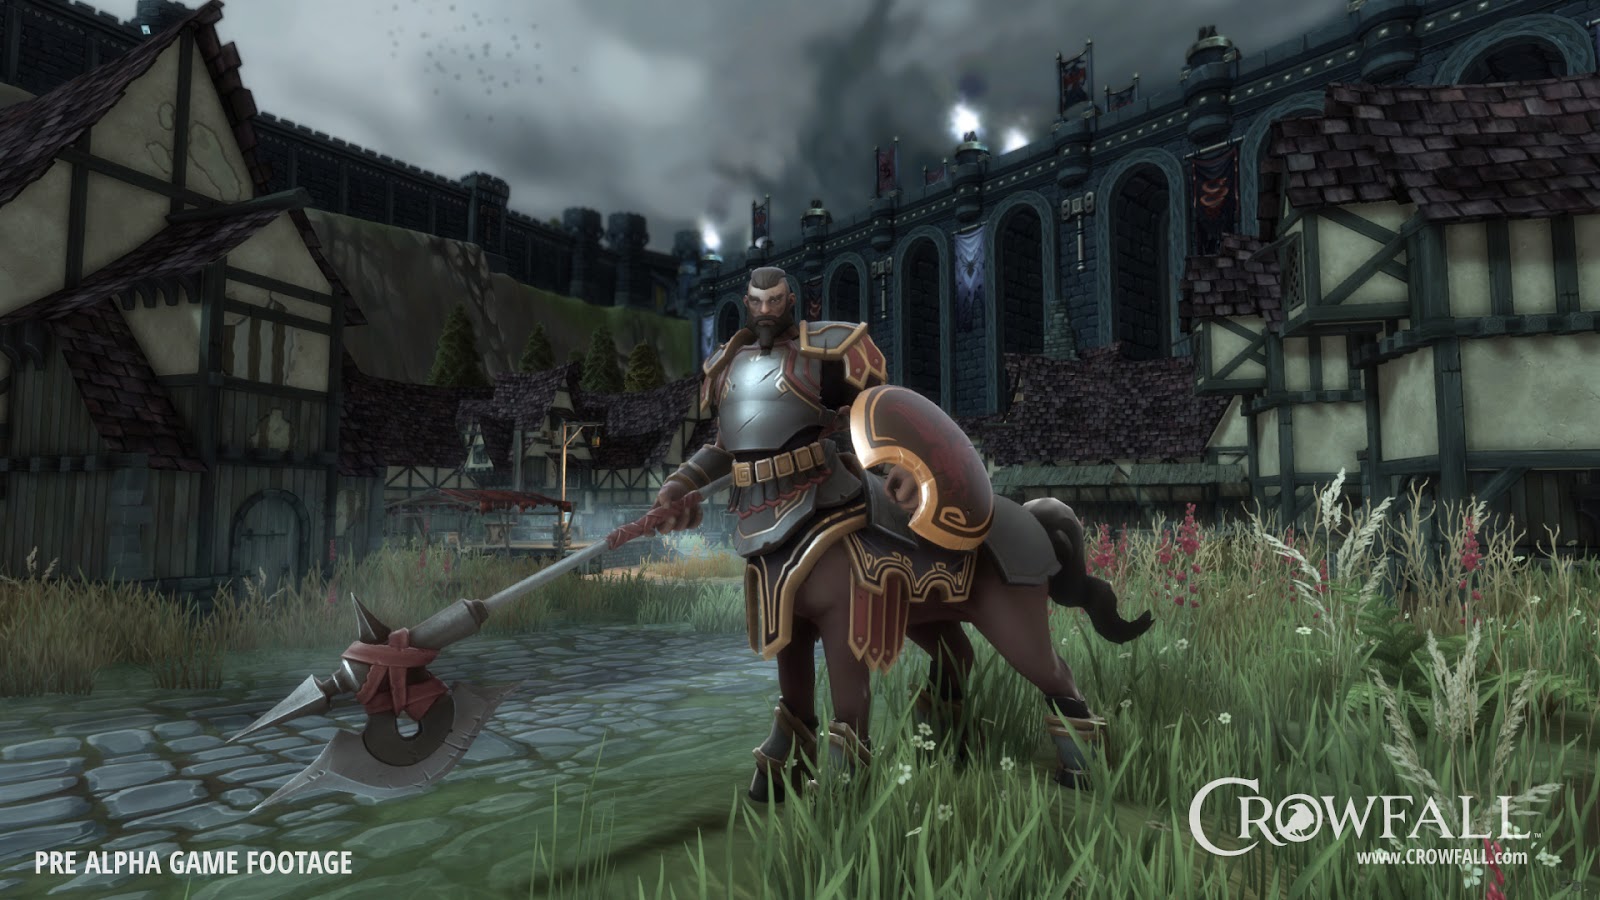 Free access codes to Crowfall's closed beta begin popping up